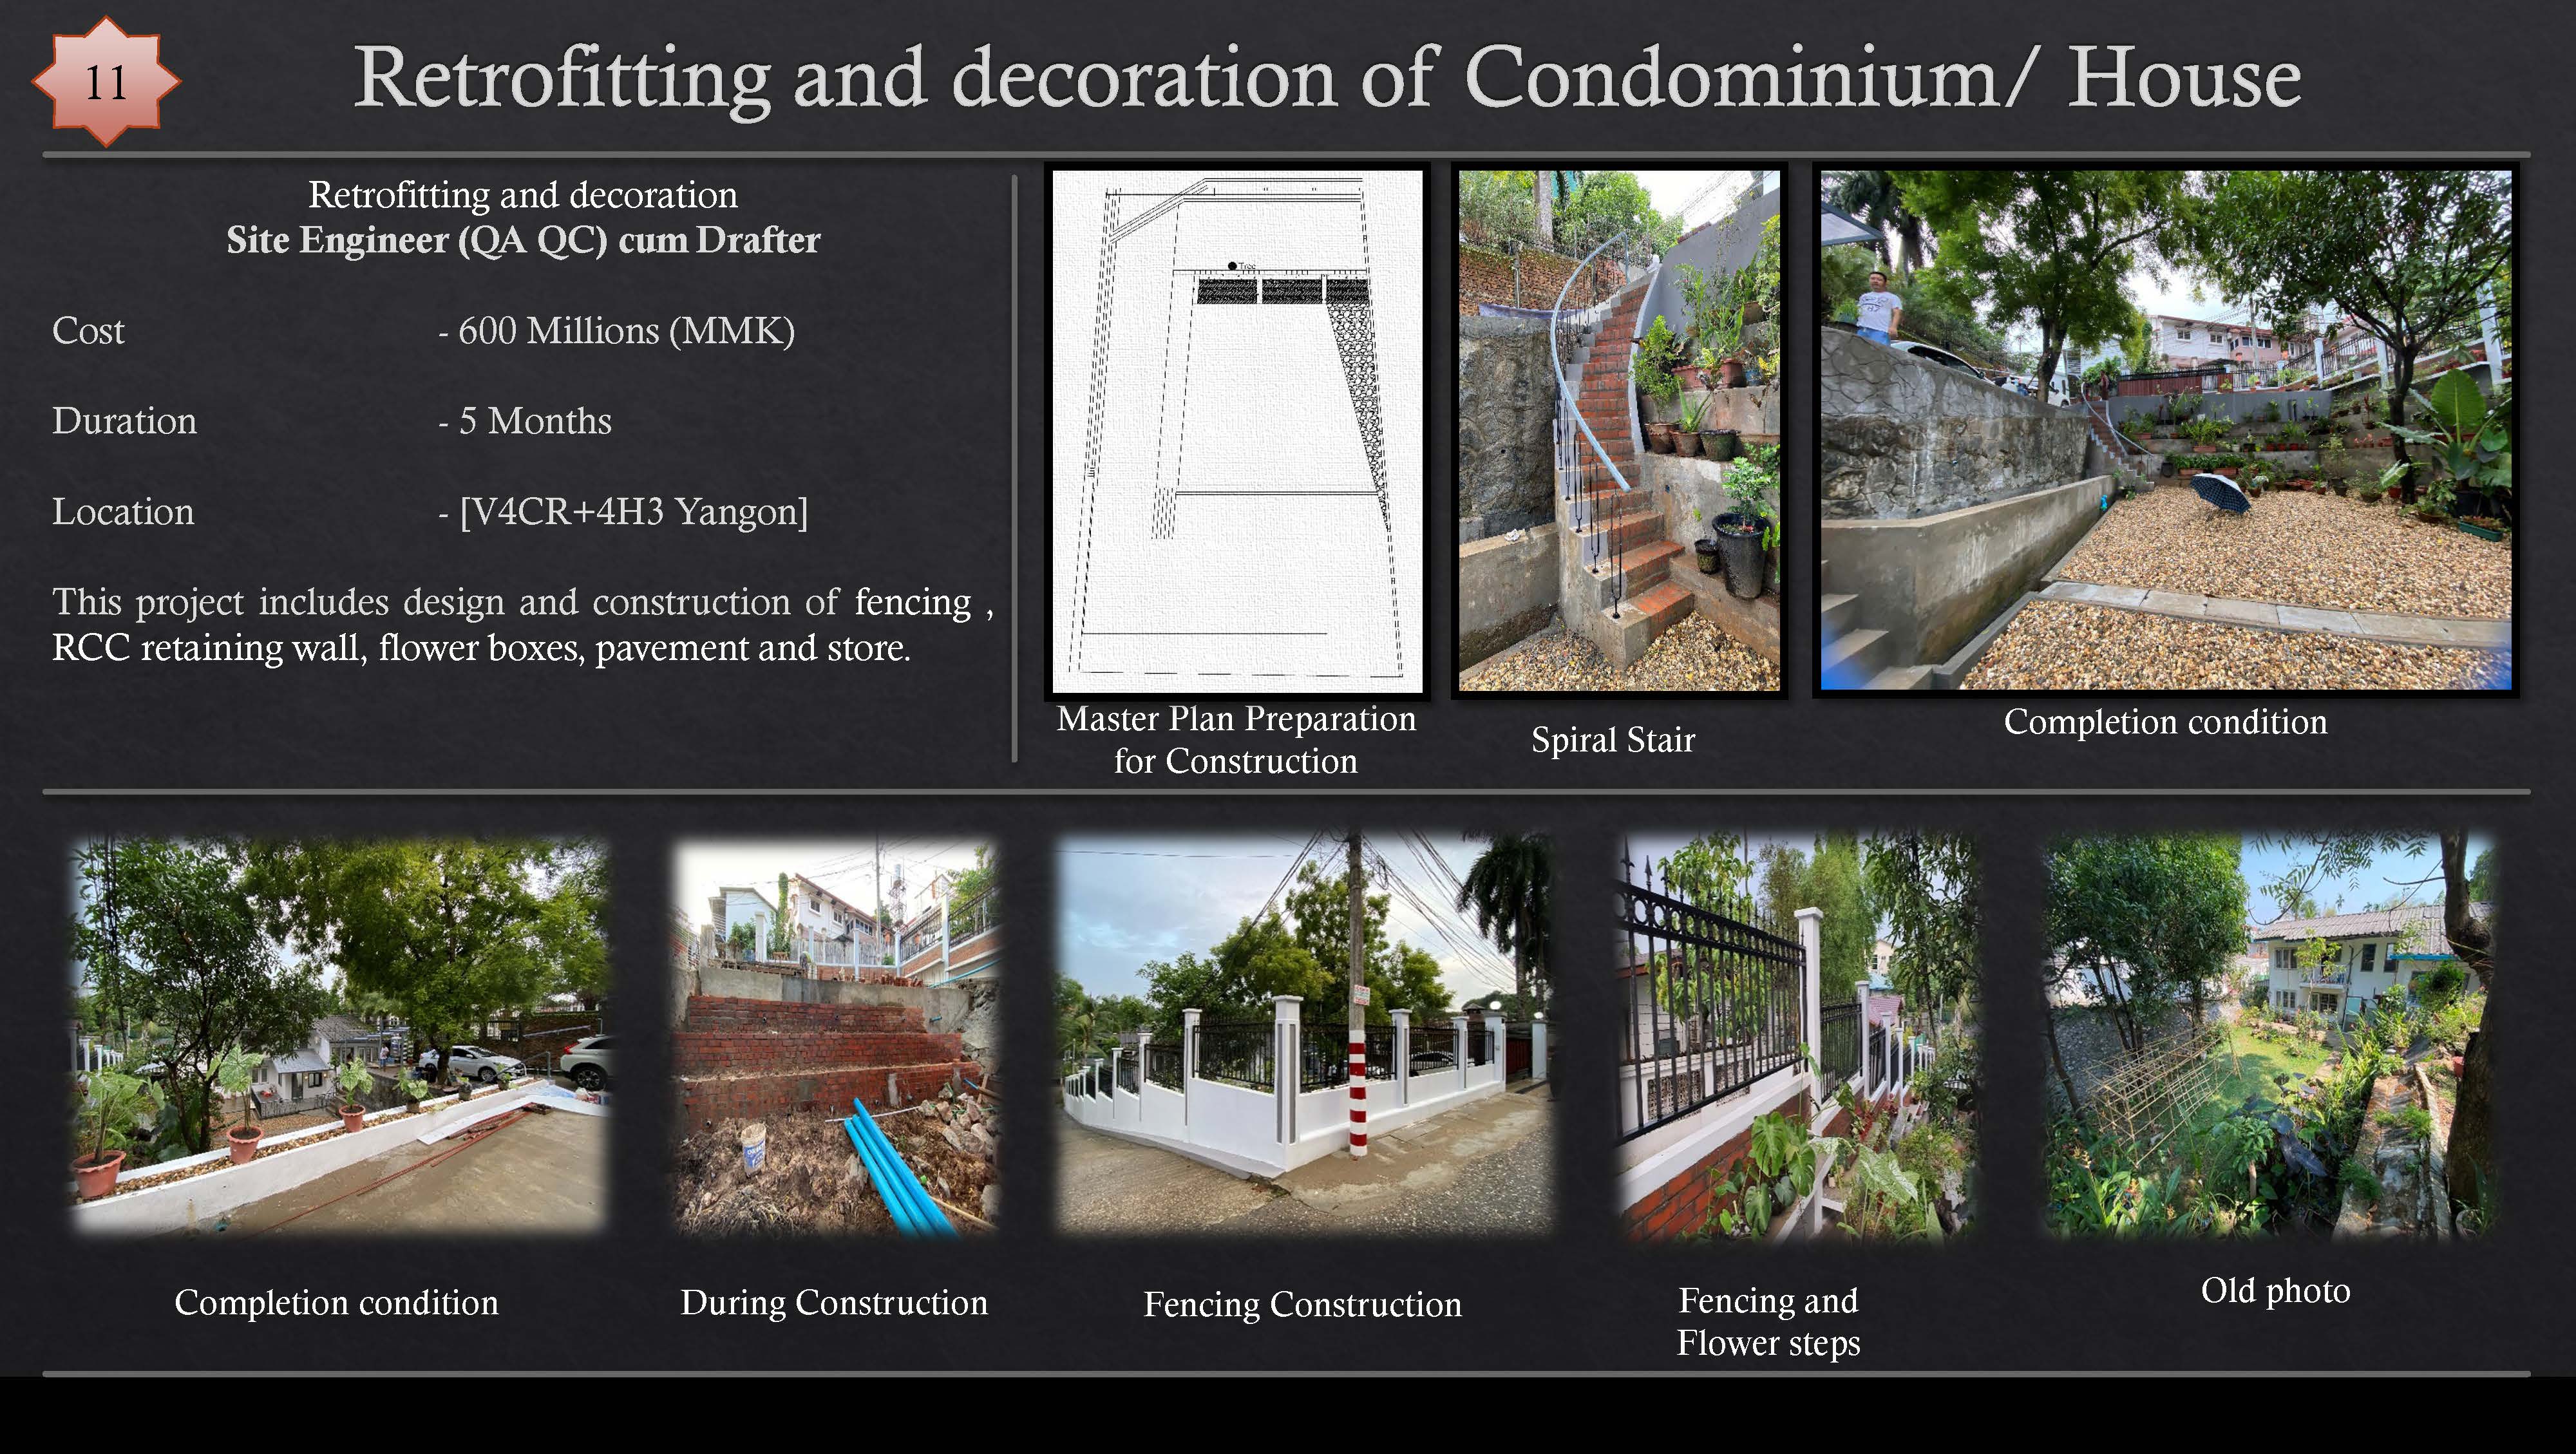 Retrofitting and decoration of Condominium/ House

Retrofitting and decoration
Site Engineer (QA QC) cum Drafter

 
  
  
  
 
  
  
  
   

(Glos - 600 Millions (MMK)
Duration - 5 Months
Location - [VACR+4H3 Yangon]

This project includes design and construction of fencing ,
RCC retaining wall, flower boxes, pavement and store.

 

Master Plan Preparation
for Construction

Spiral Stair

QT) ET Re LTT During Construction Fencing Construction IE Tl Teg SCRA
Flower steps